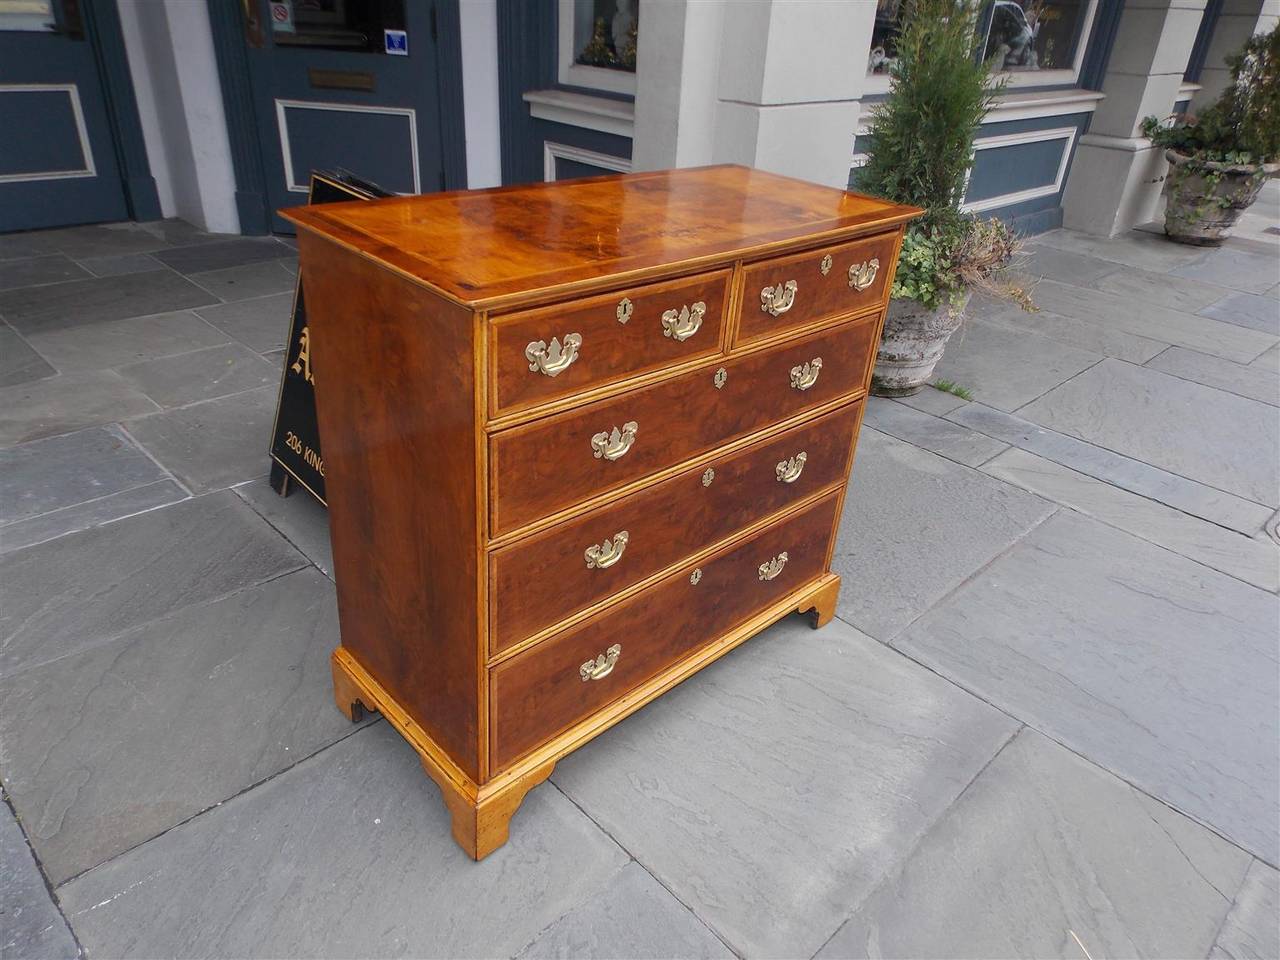 American Chippendale figured burl walnut and Yagrumo Macho graduated five drawer chests with feather banding, original brasses, and terminating on the original bracket feet. White pine secondary wood.
Boston, Late 18th century